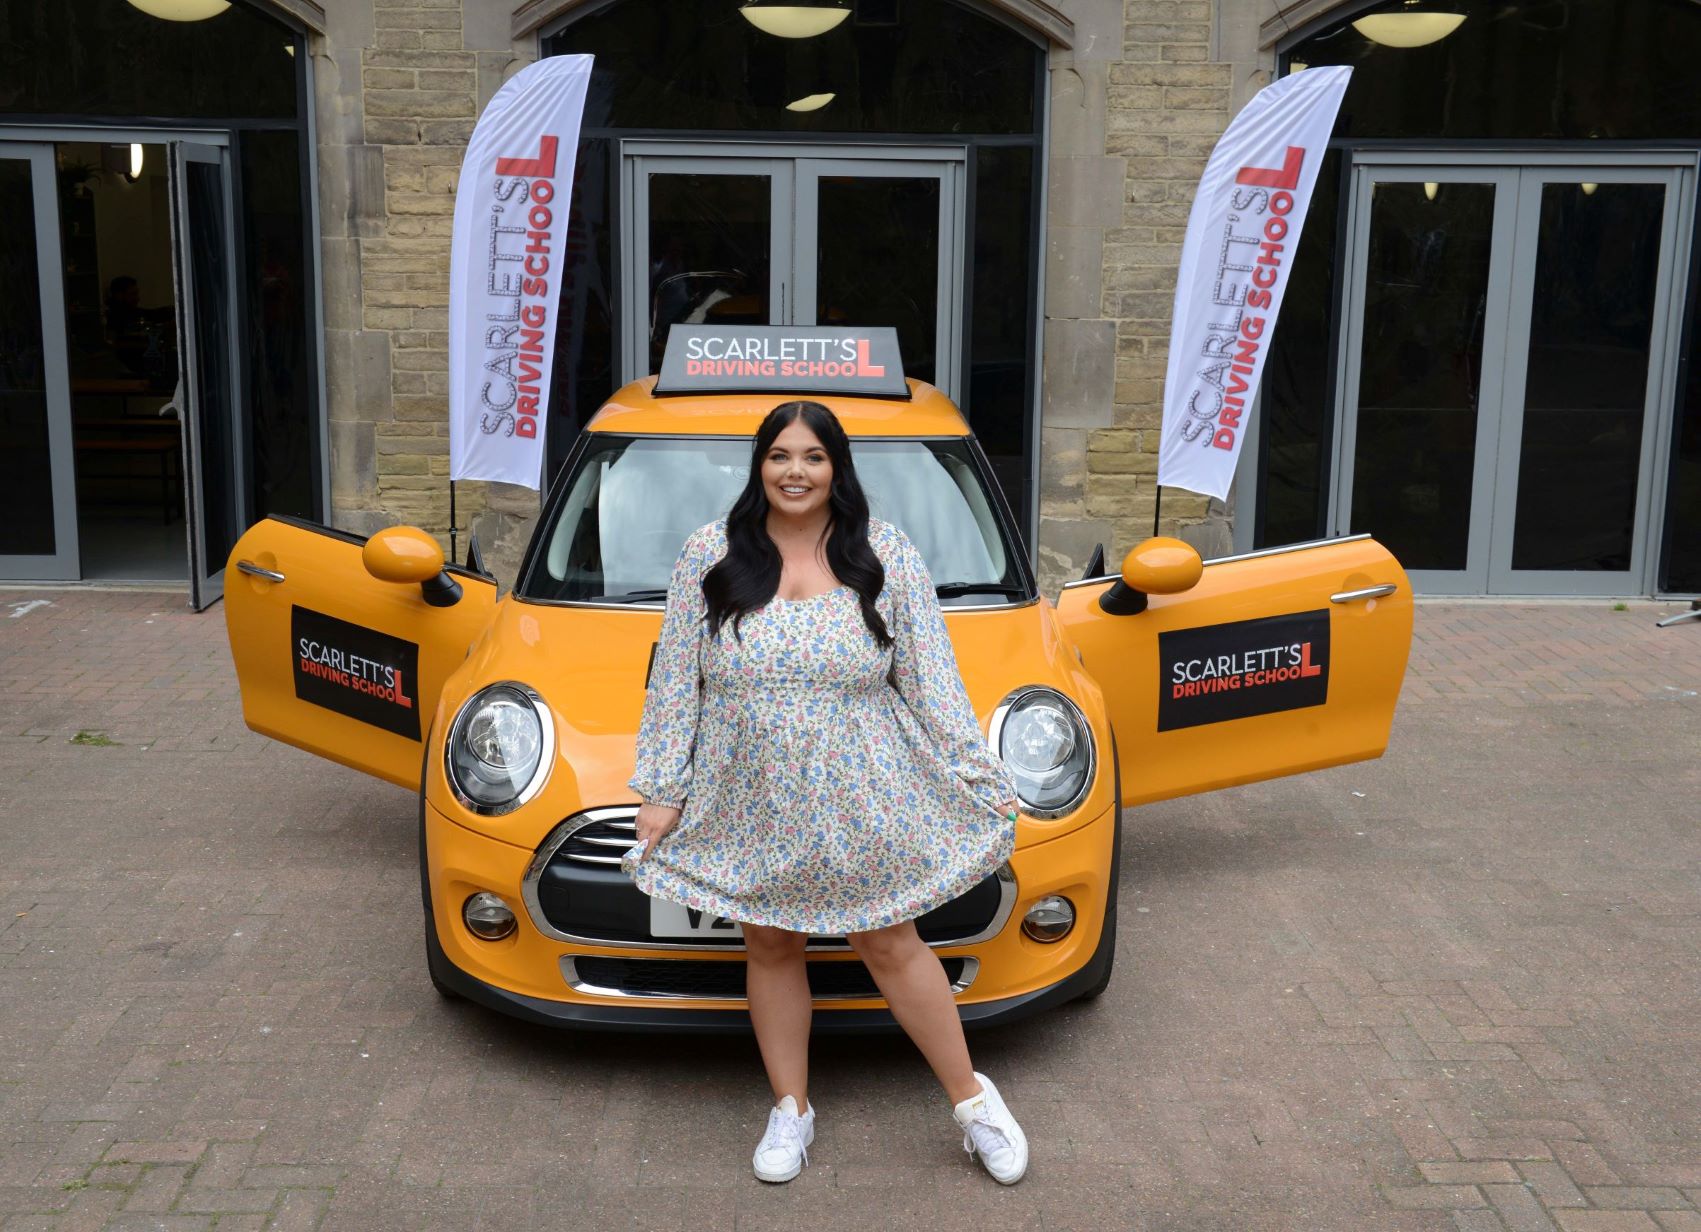 Scarlett’s Driving School – New series starts 13th of February on BBC One